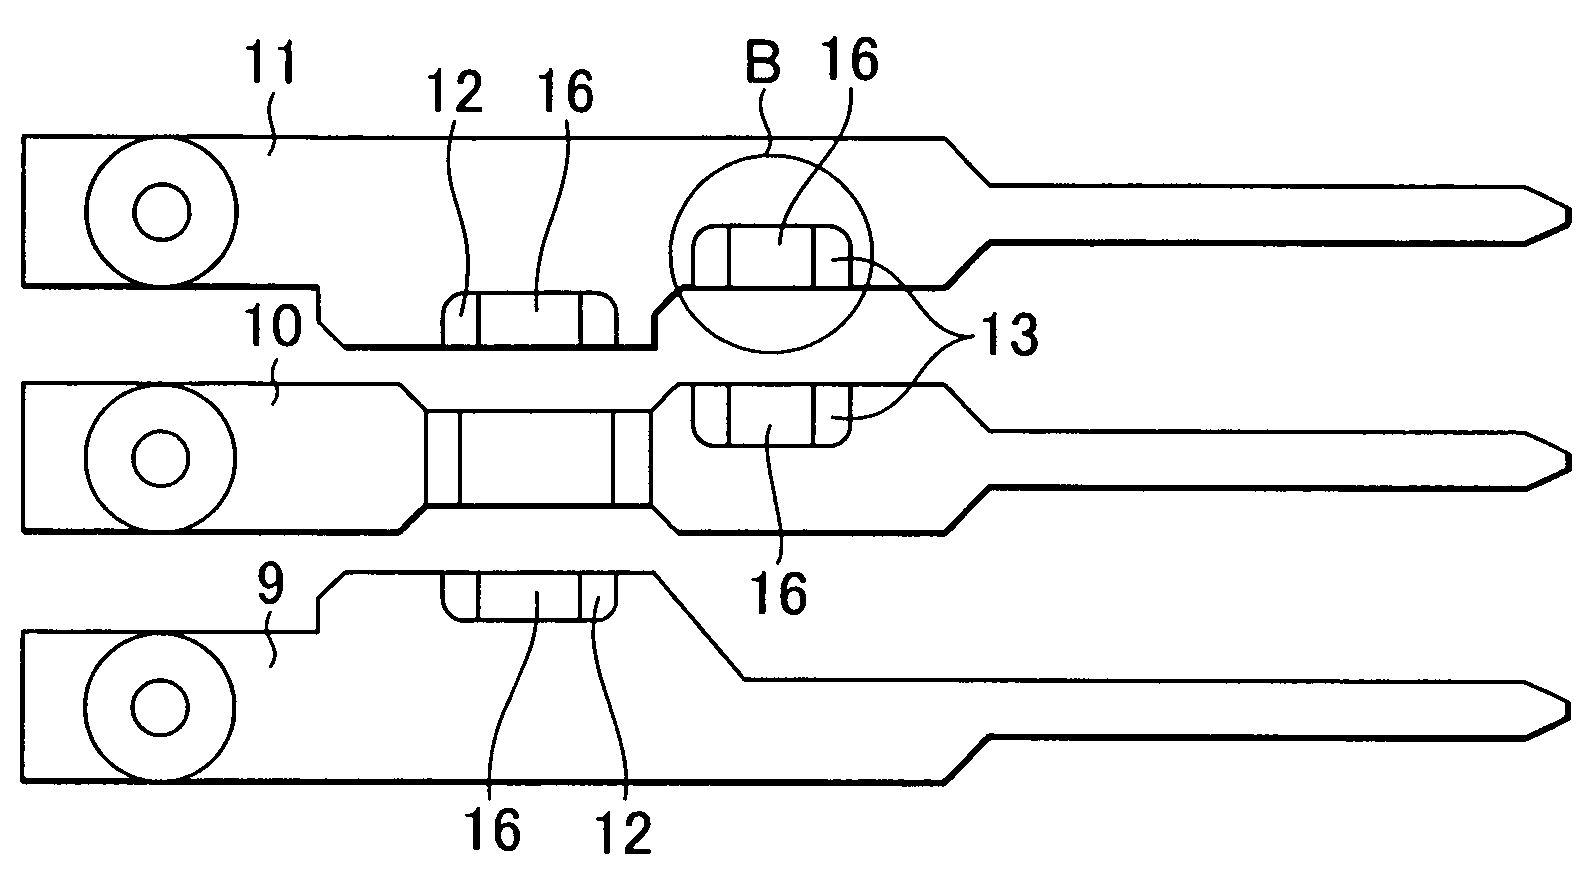 Electronic device and pressure sensor